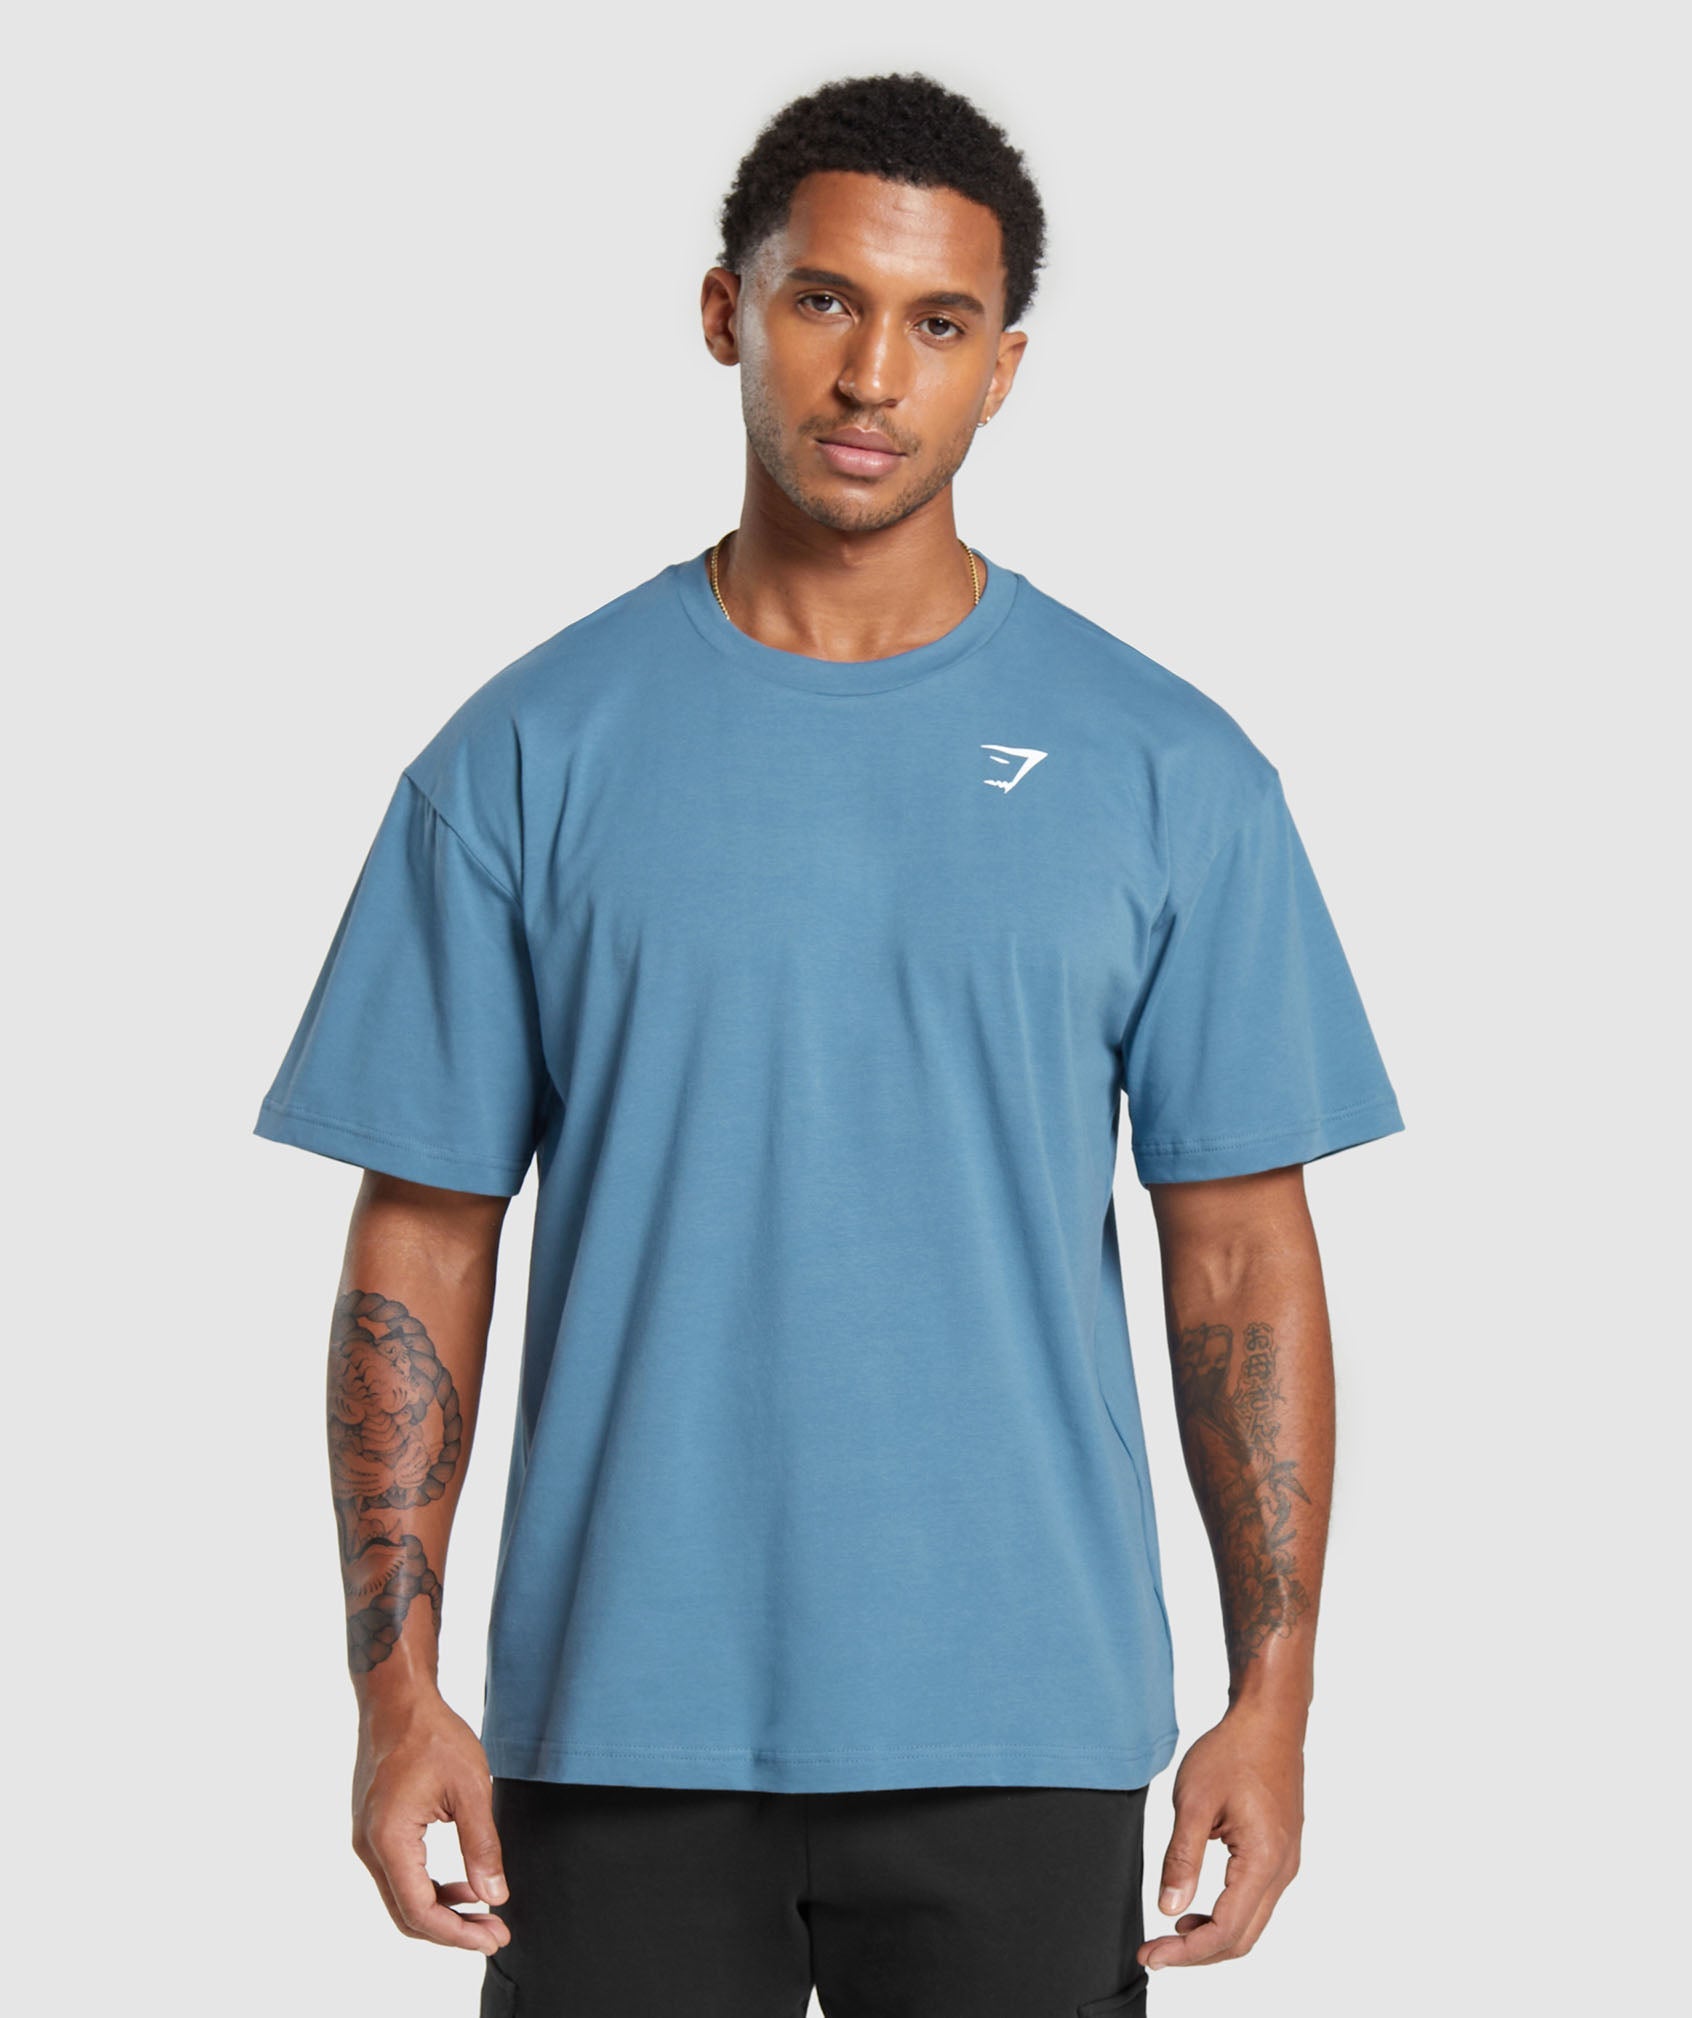 Essential Oversized T-Shirt in Faded Blue is out of stock